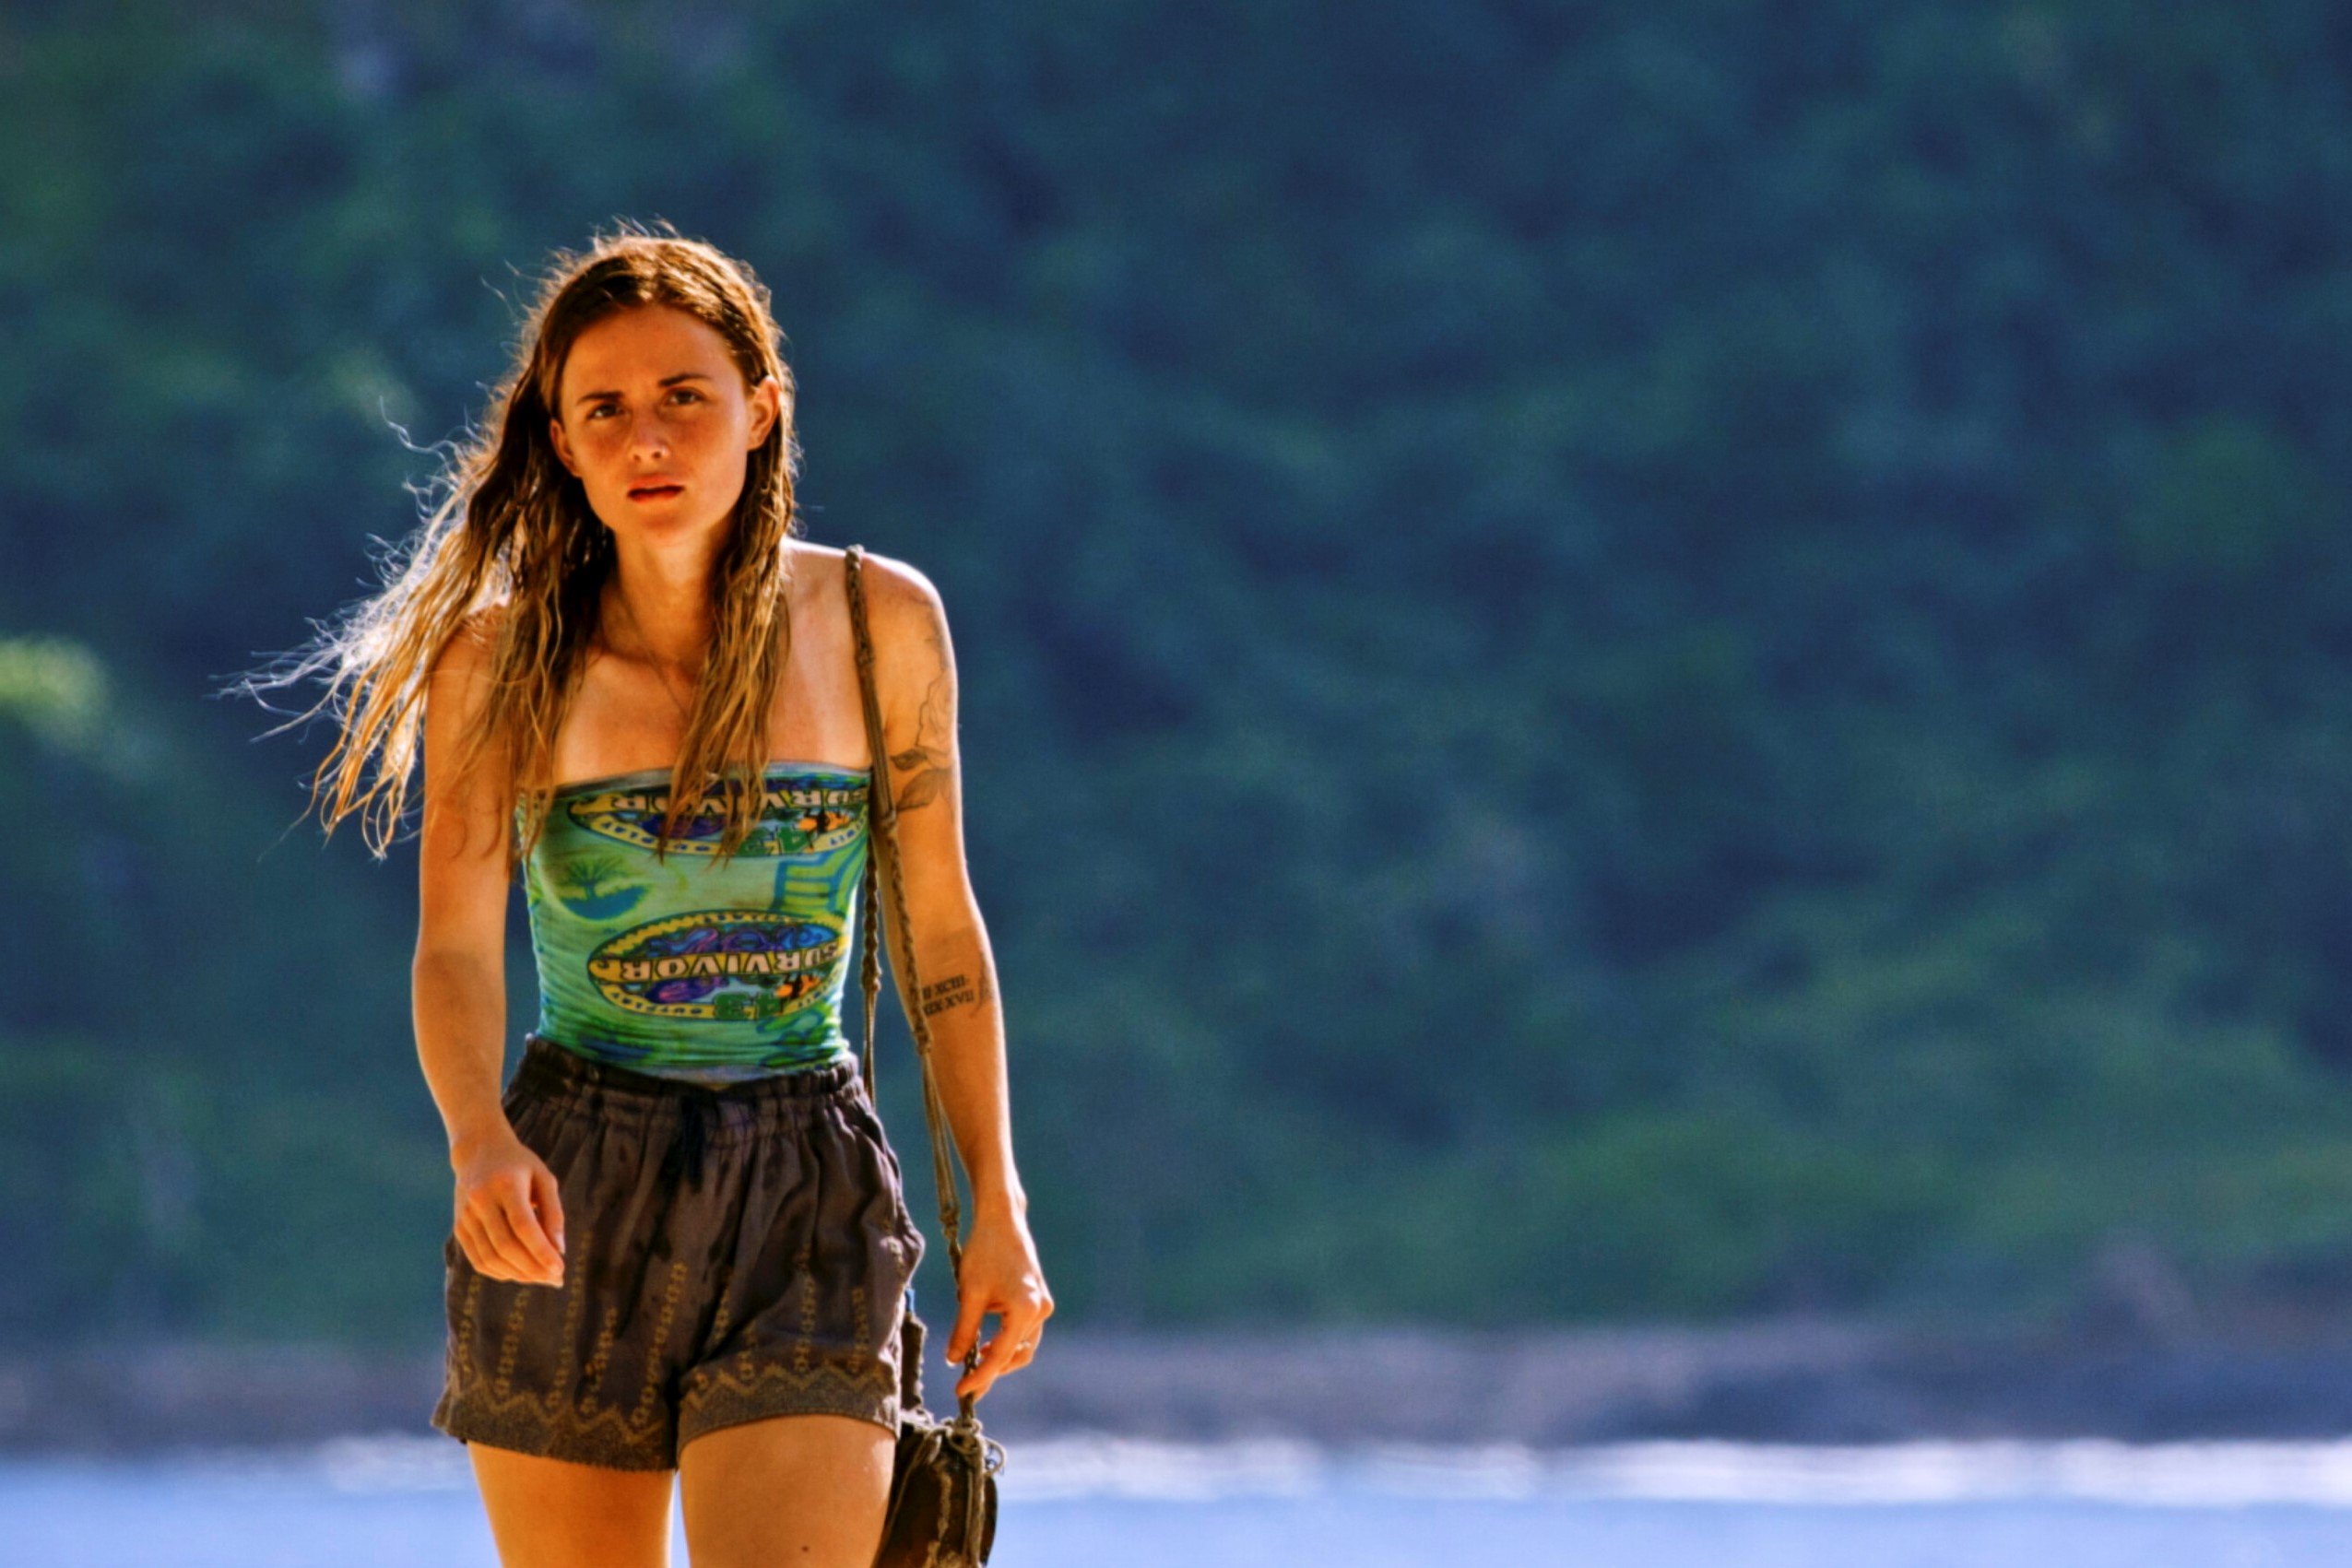 Cassidy Clark, who starred in 'Survivor 43' on CBS, wears her light blue 'Survivor' buff as a top and dark gray shorts.